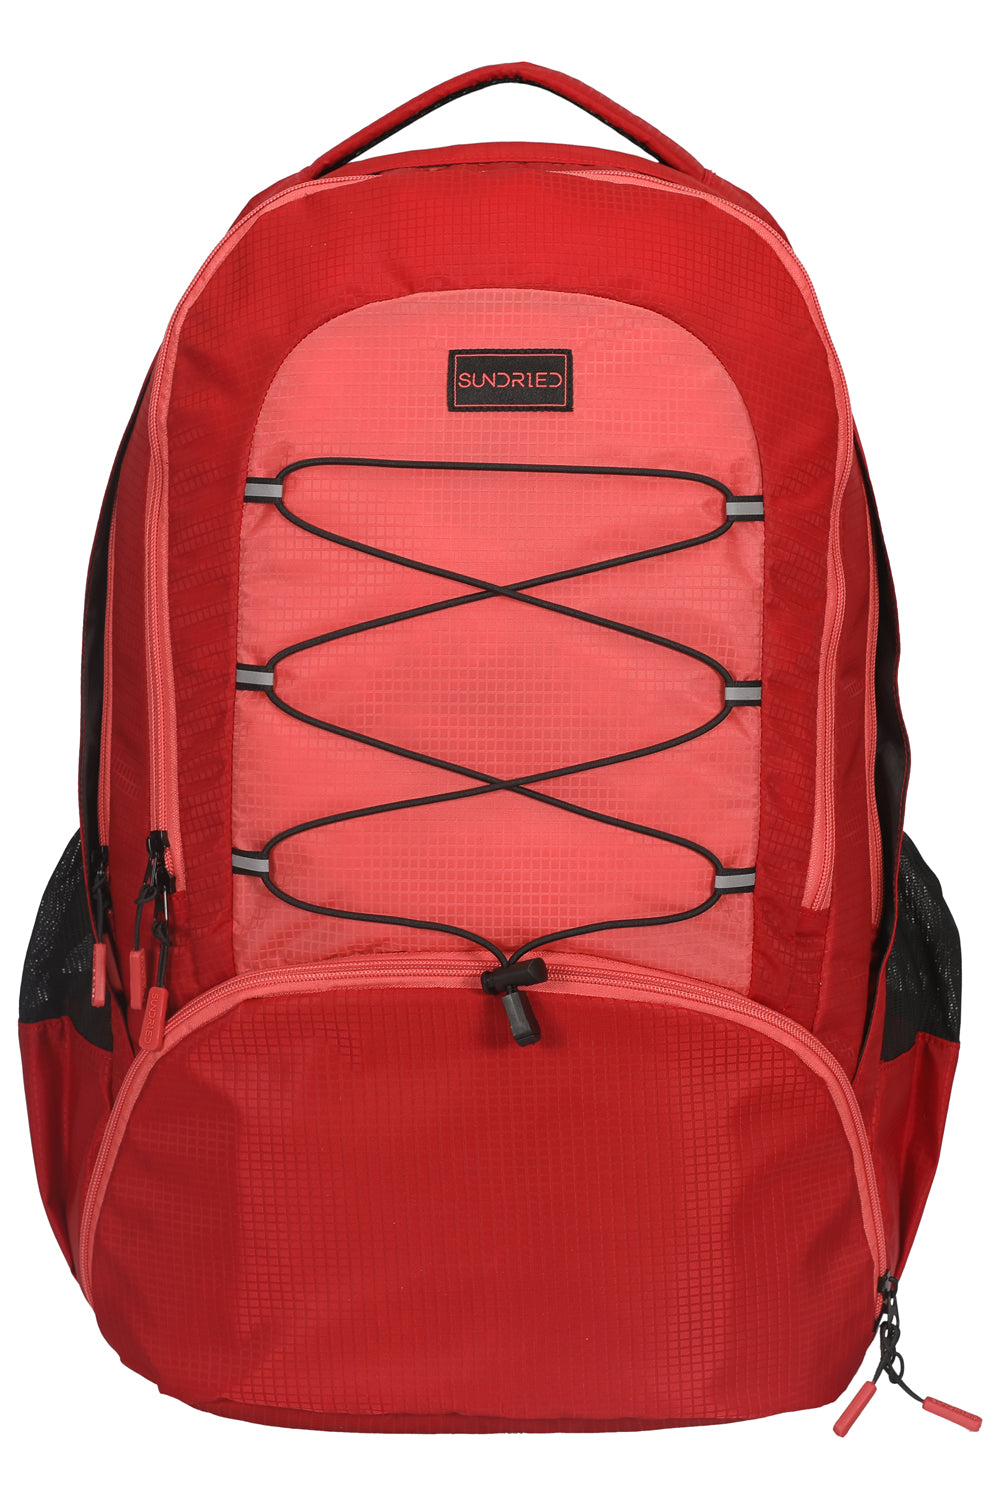 Sundried Trekking Backpack Red Bags SD0404 Activewear